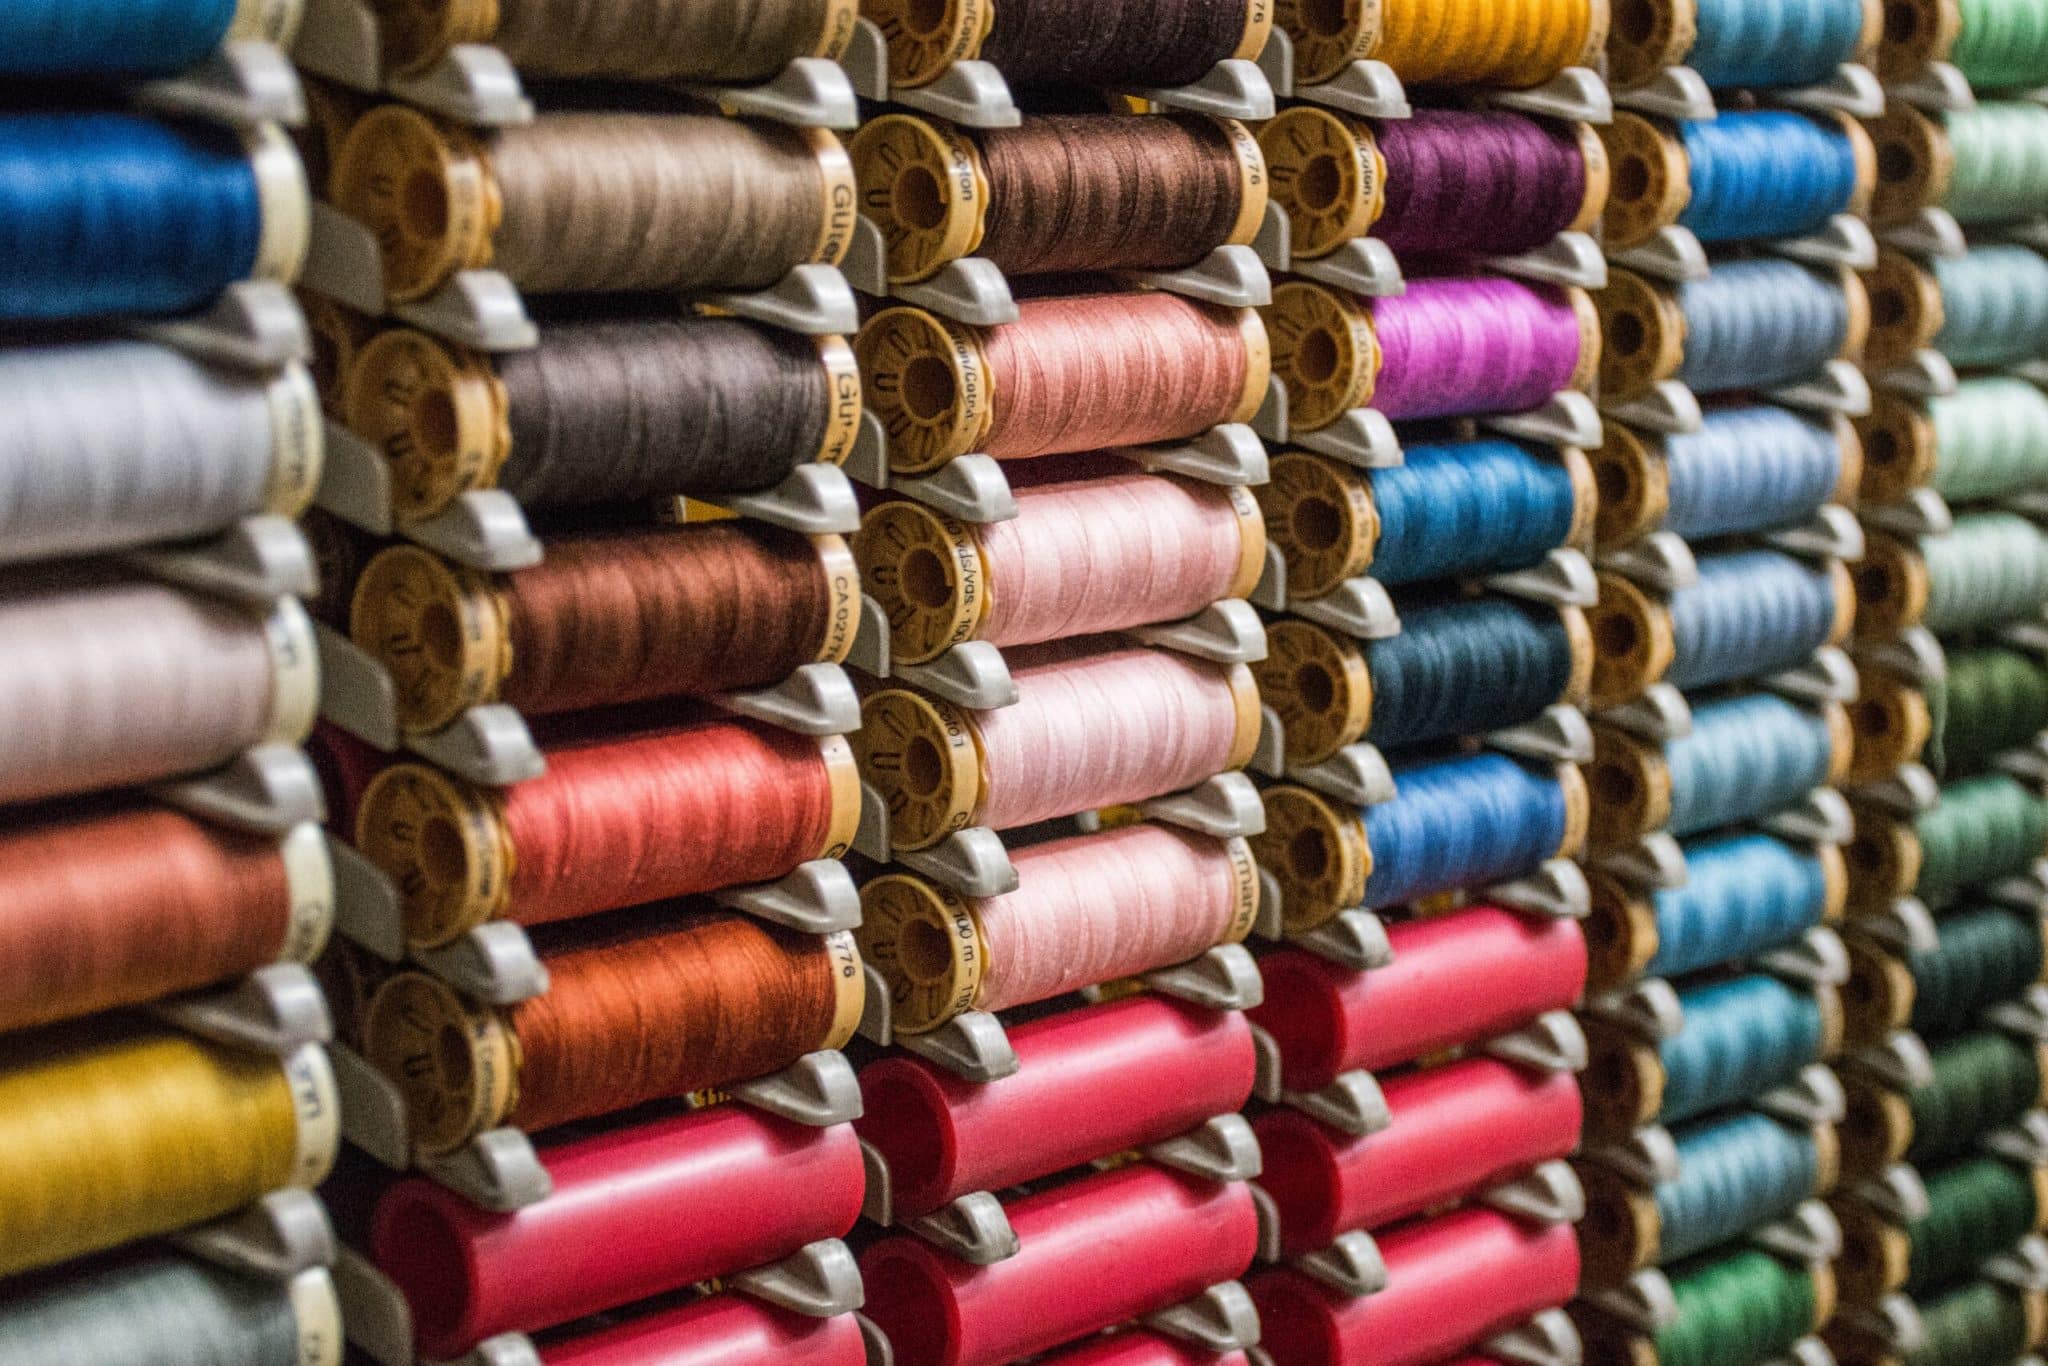 Photo of spools of colorful thread Hector J Rivas for Unsplash